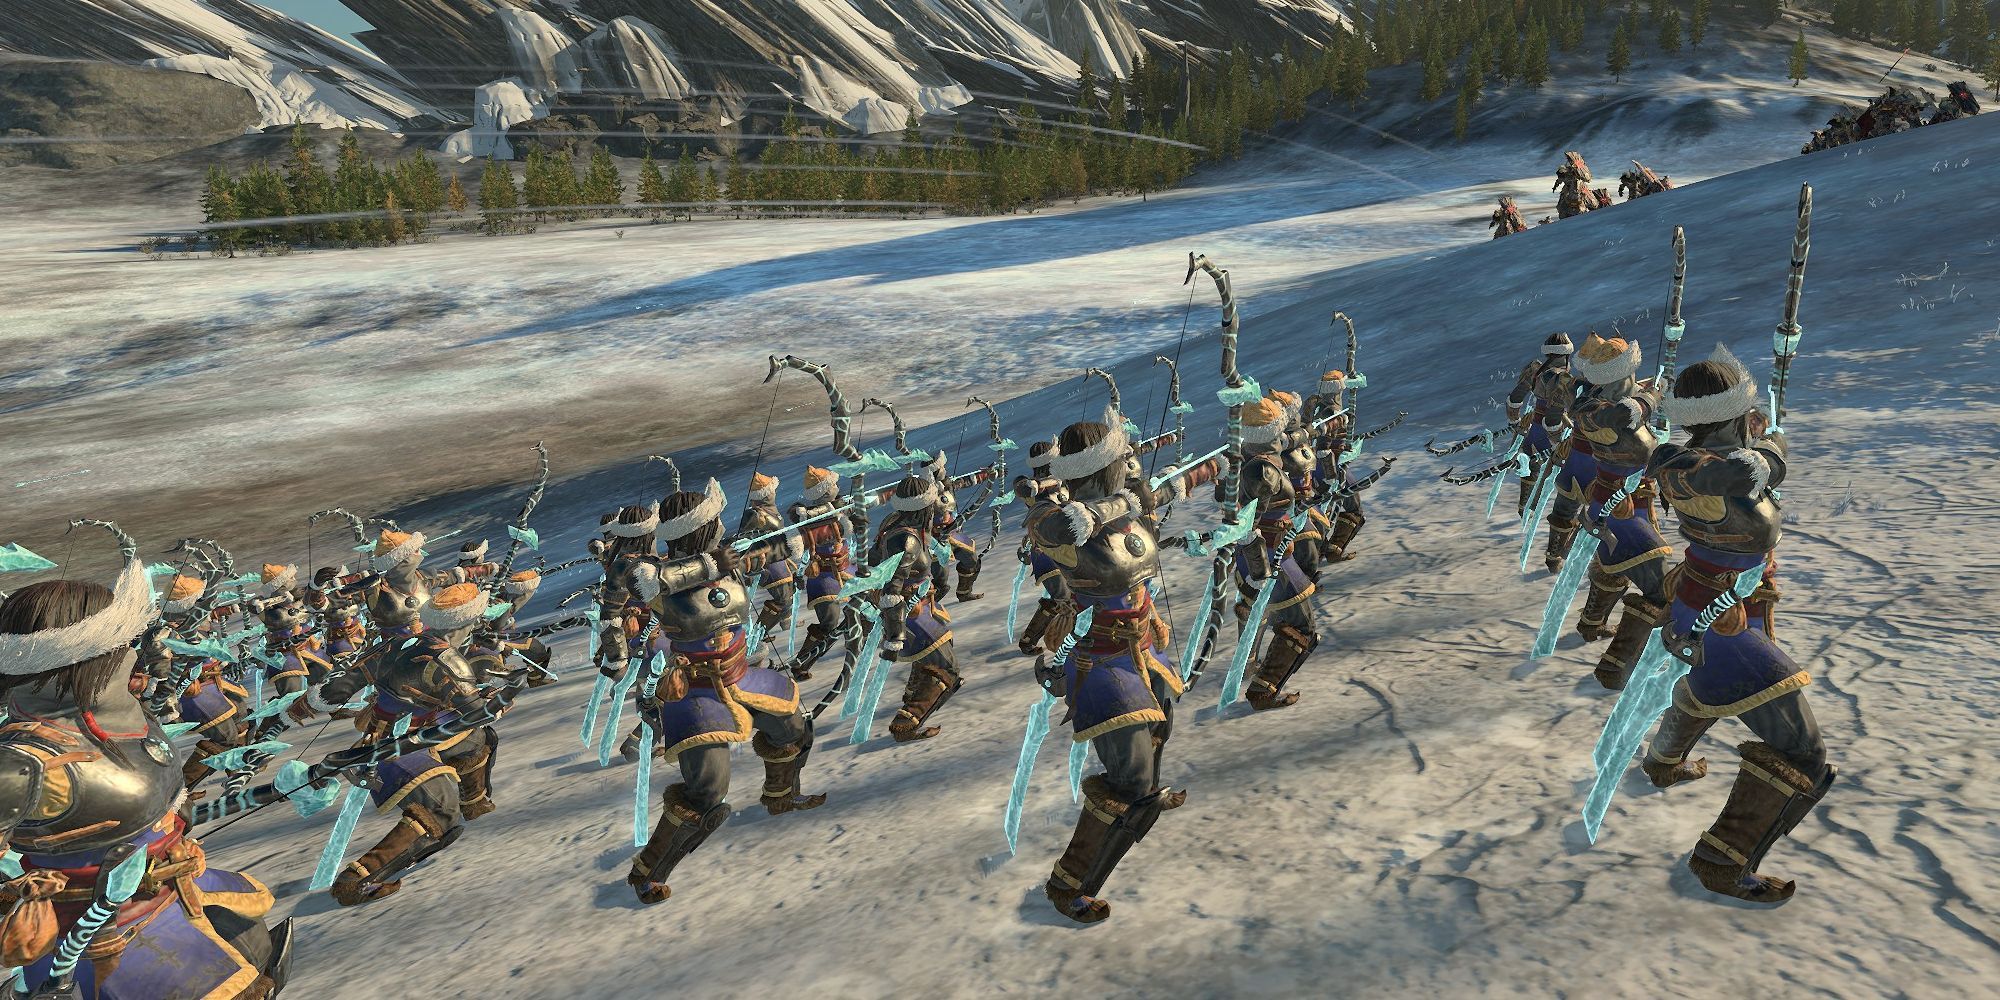 Ice Guard firing on chaos knighs